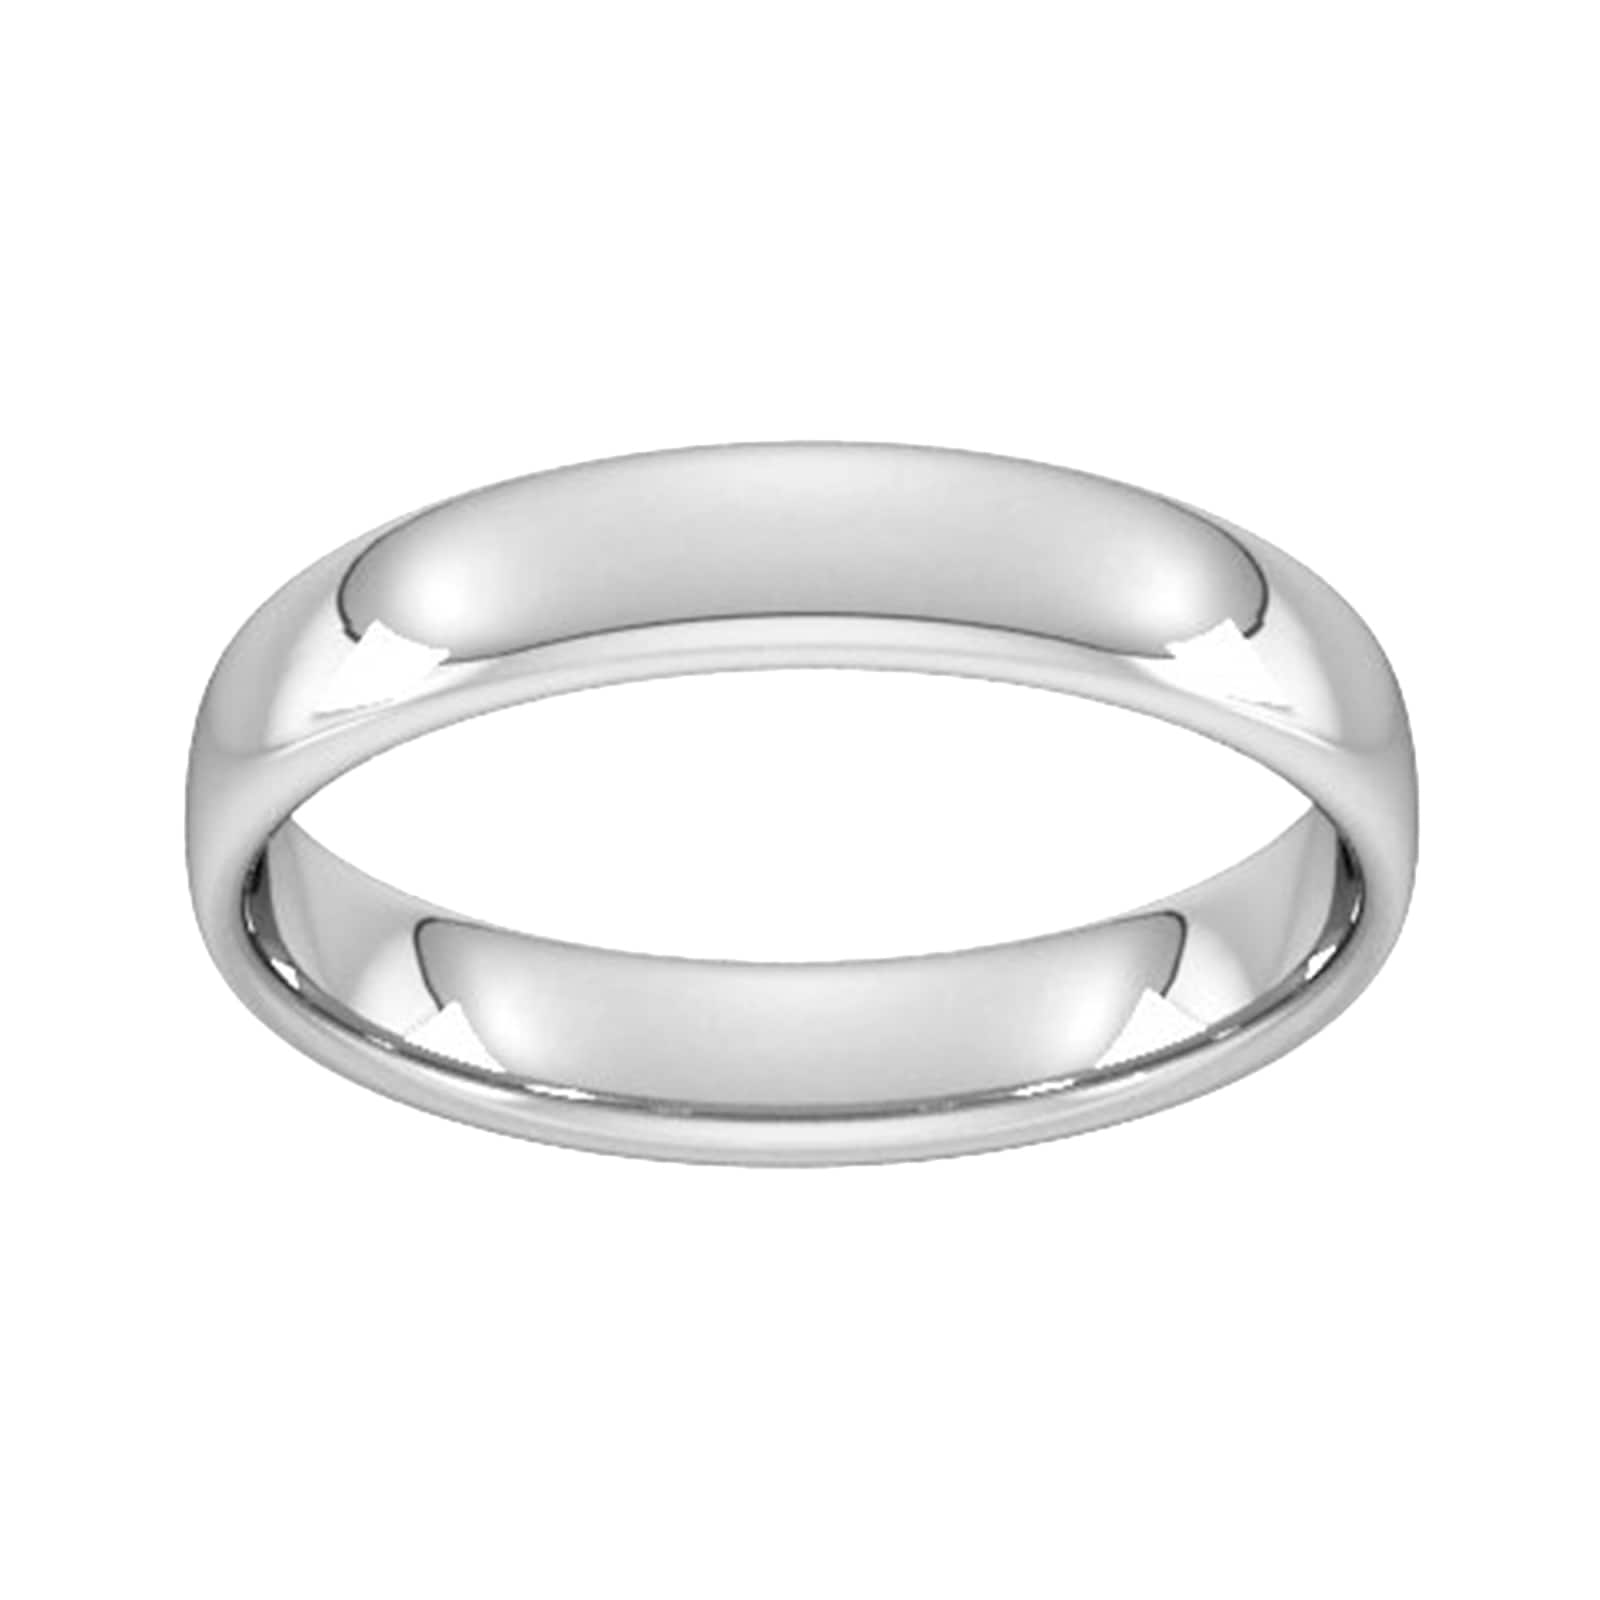 4mm Slight Court Standard Wedding Ring In Sterling Silver - Ring Size Q